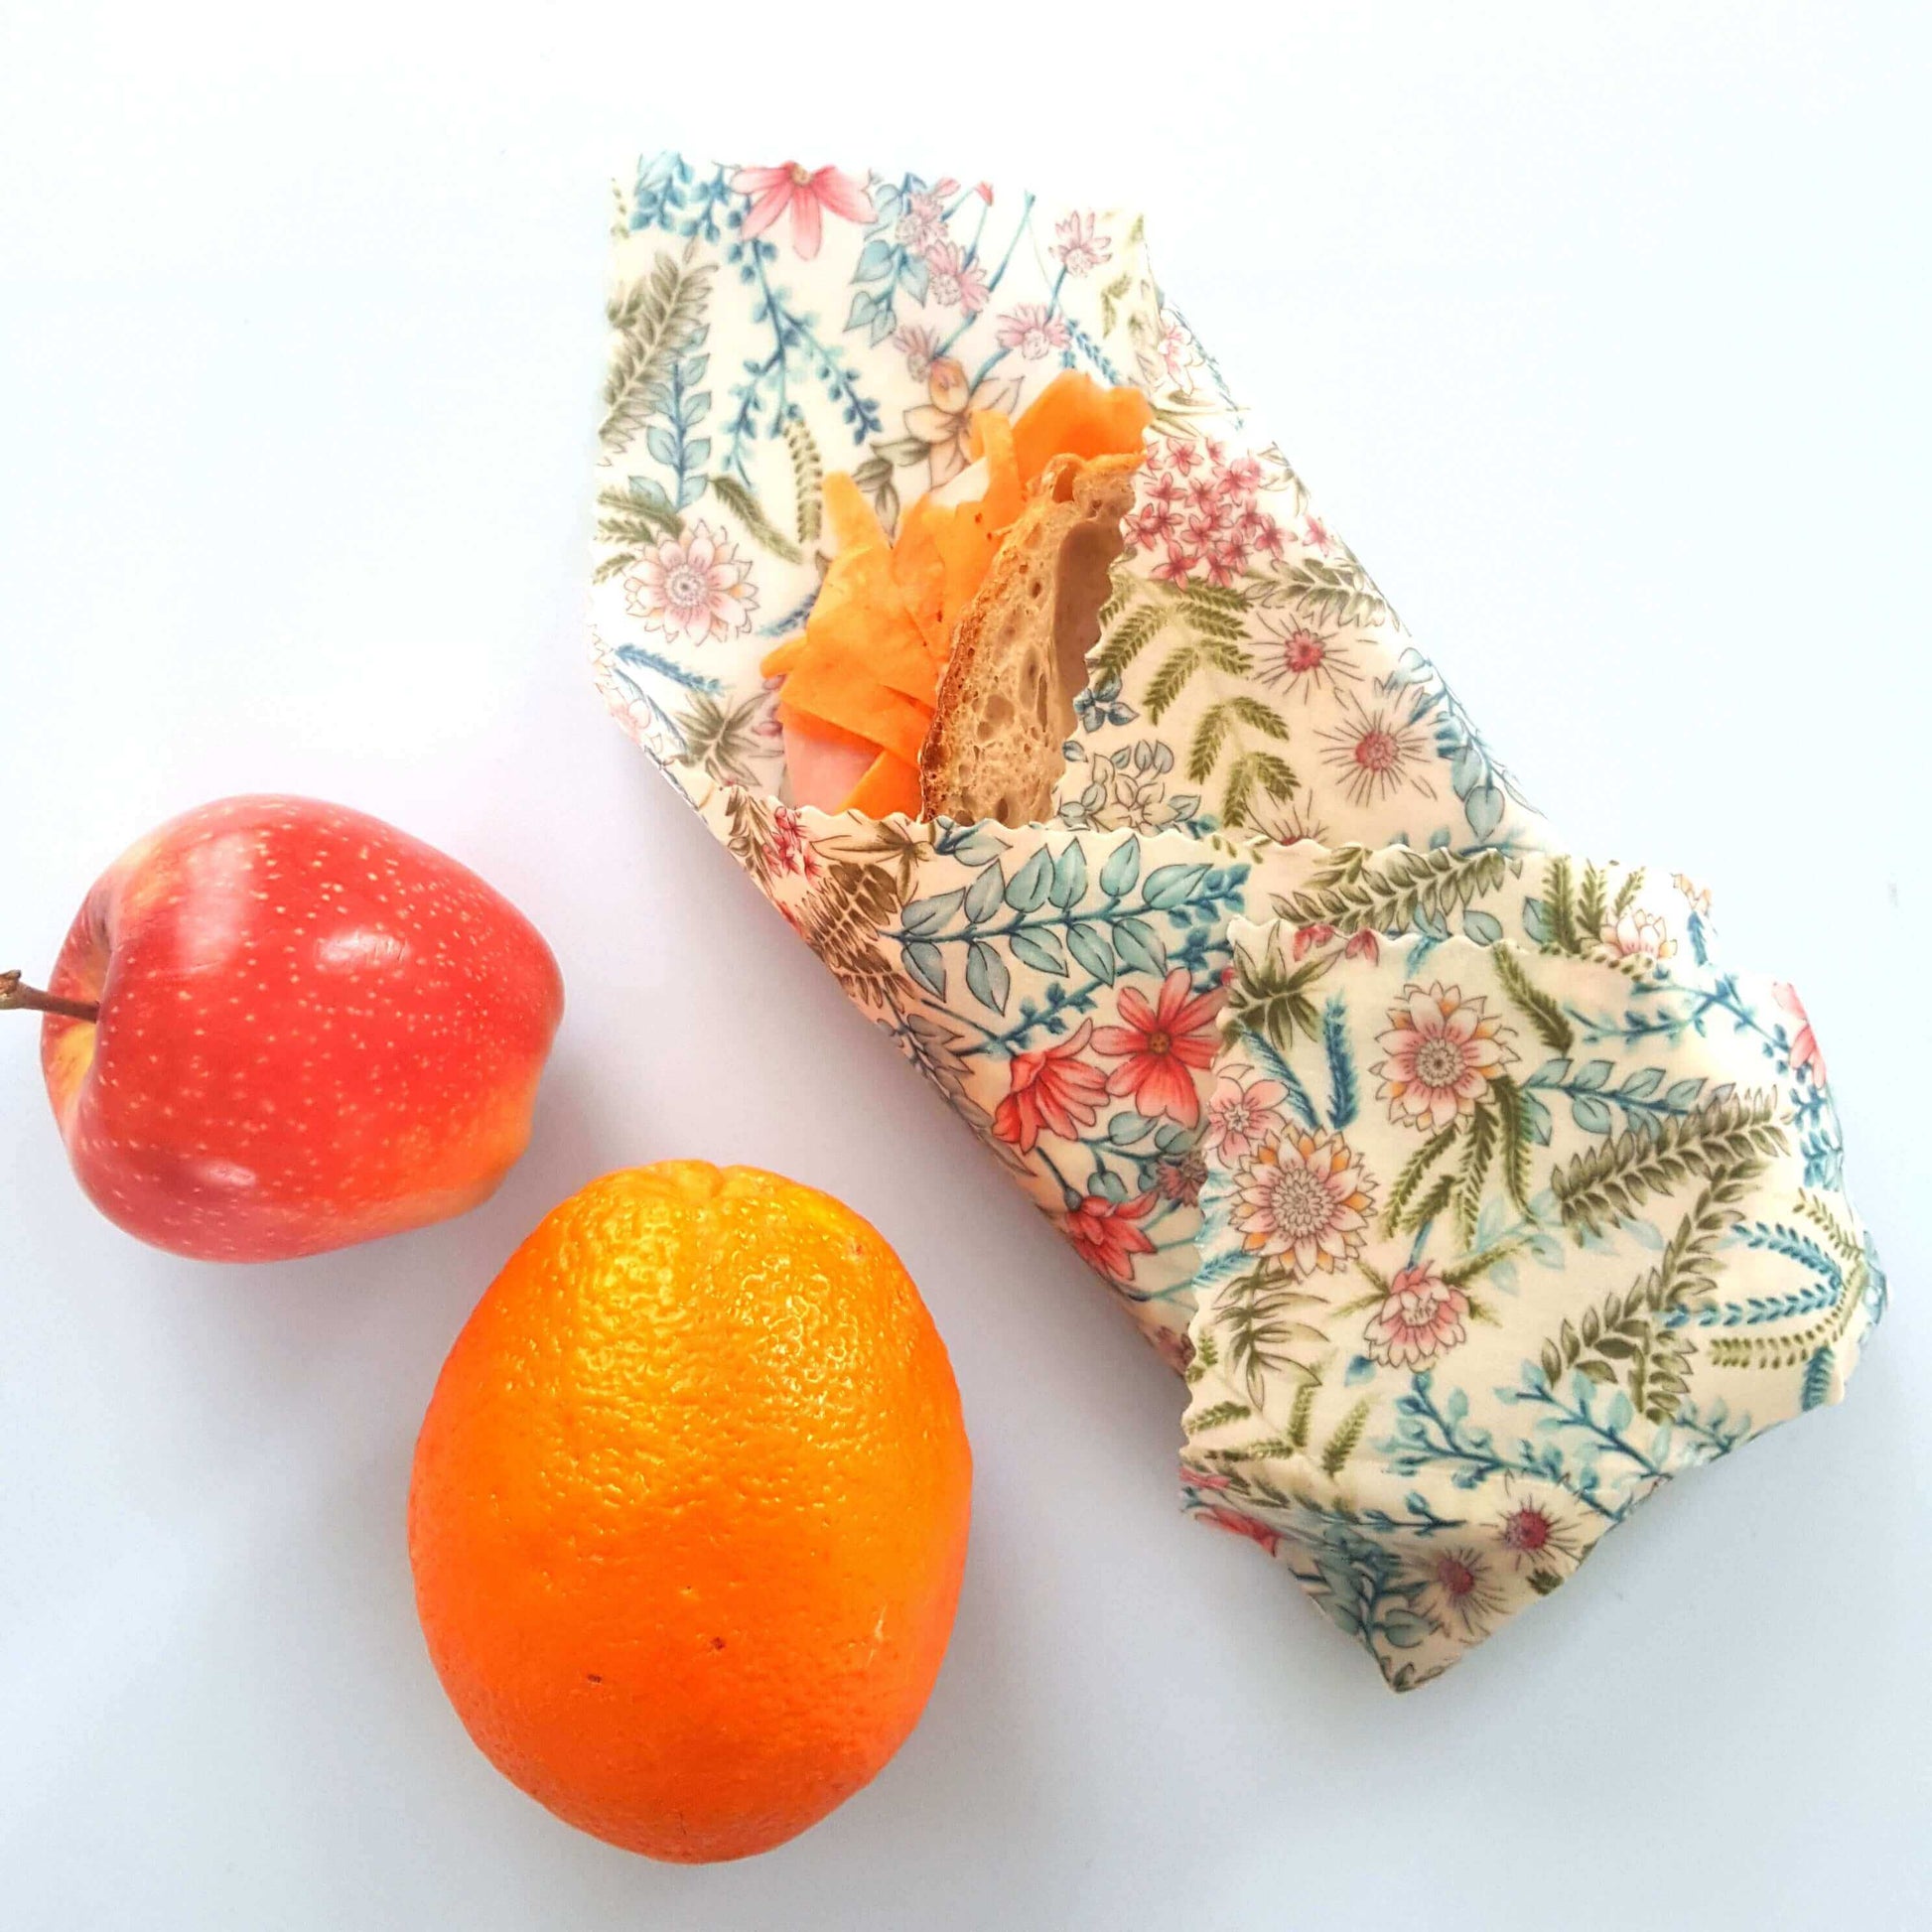 Reusable Beeswax Food Wraps 100% Hand Made in the UK by Honey Bee Good shown in Set of 3 Classic Botanical on sandwich